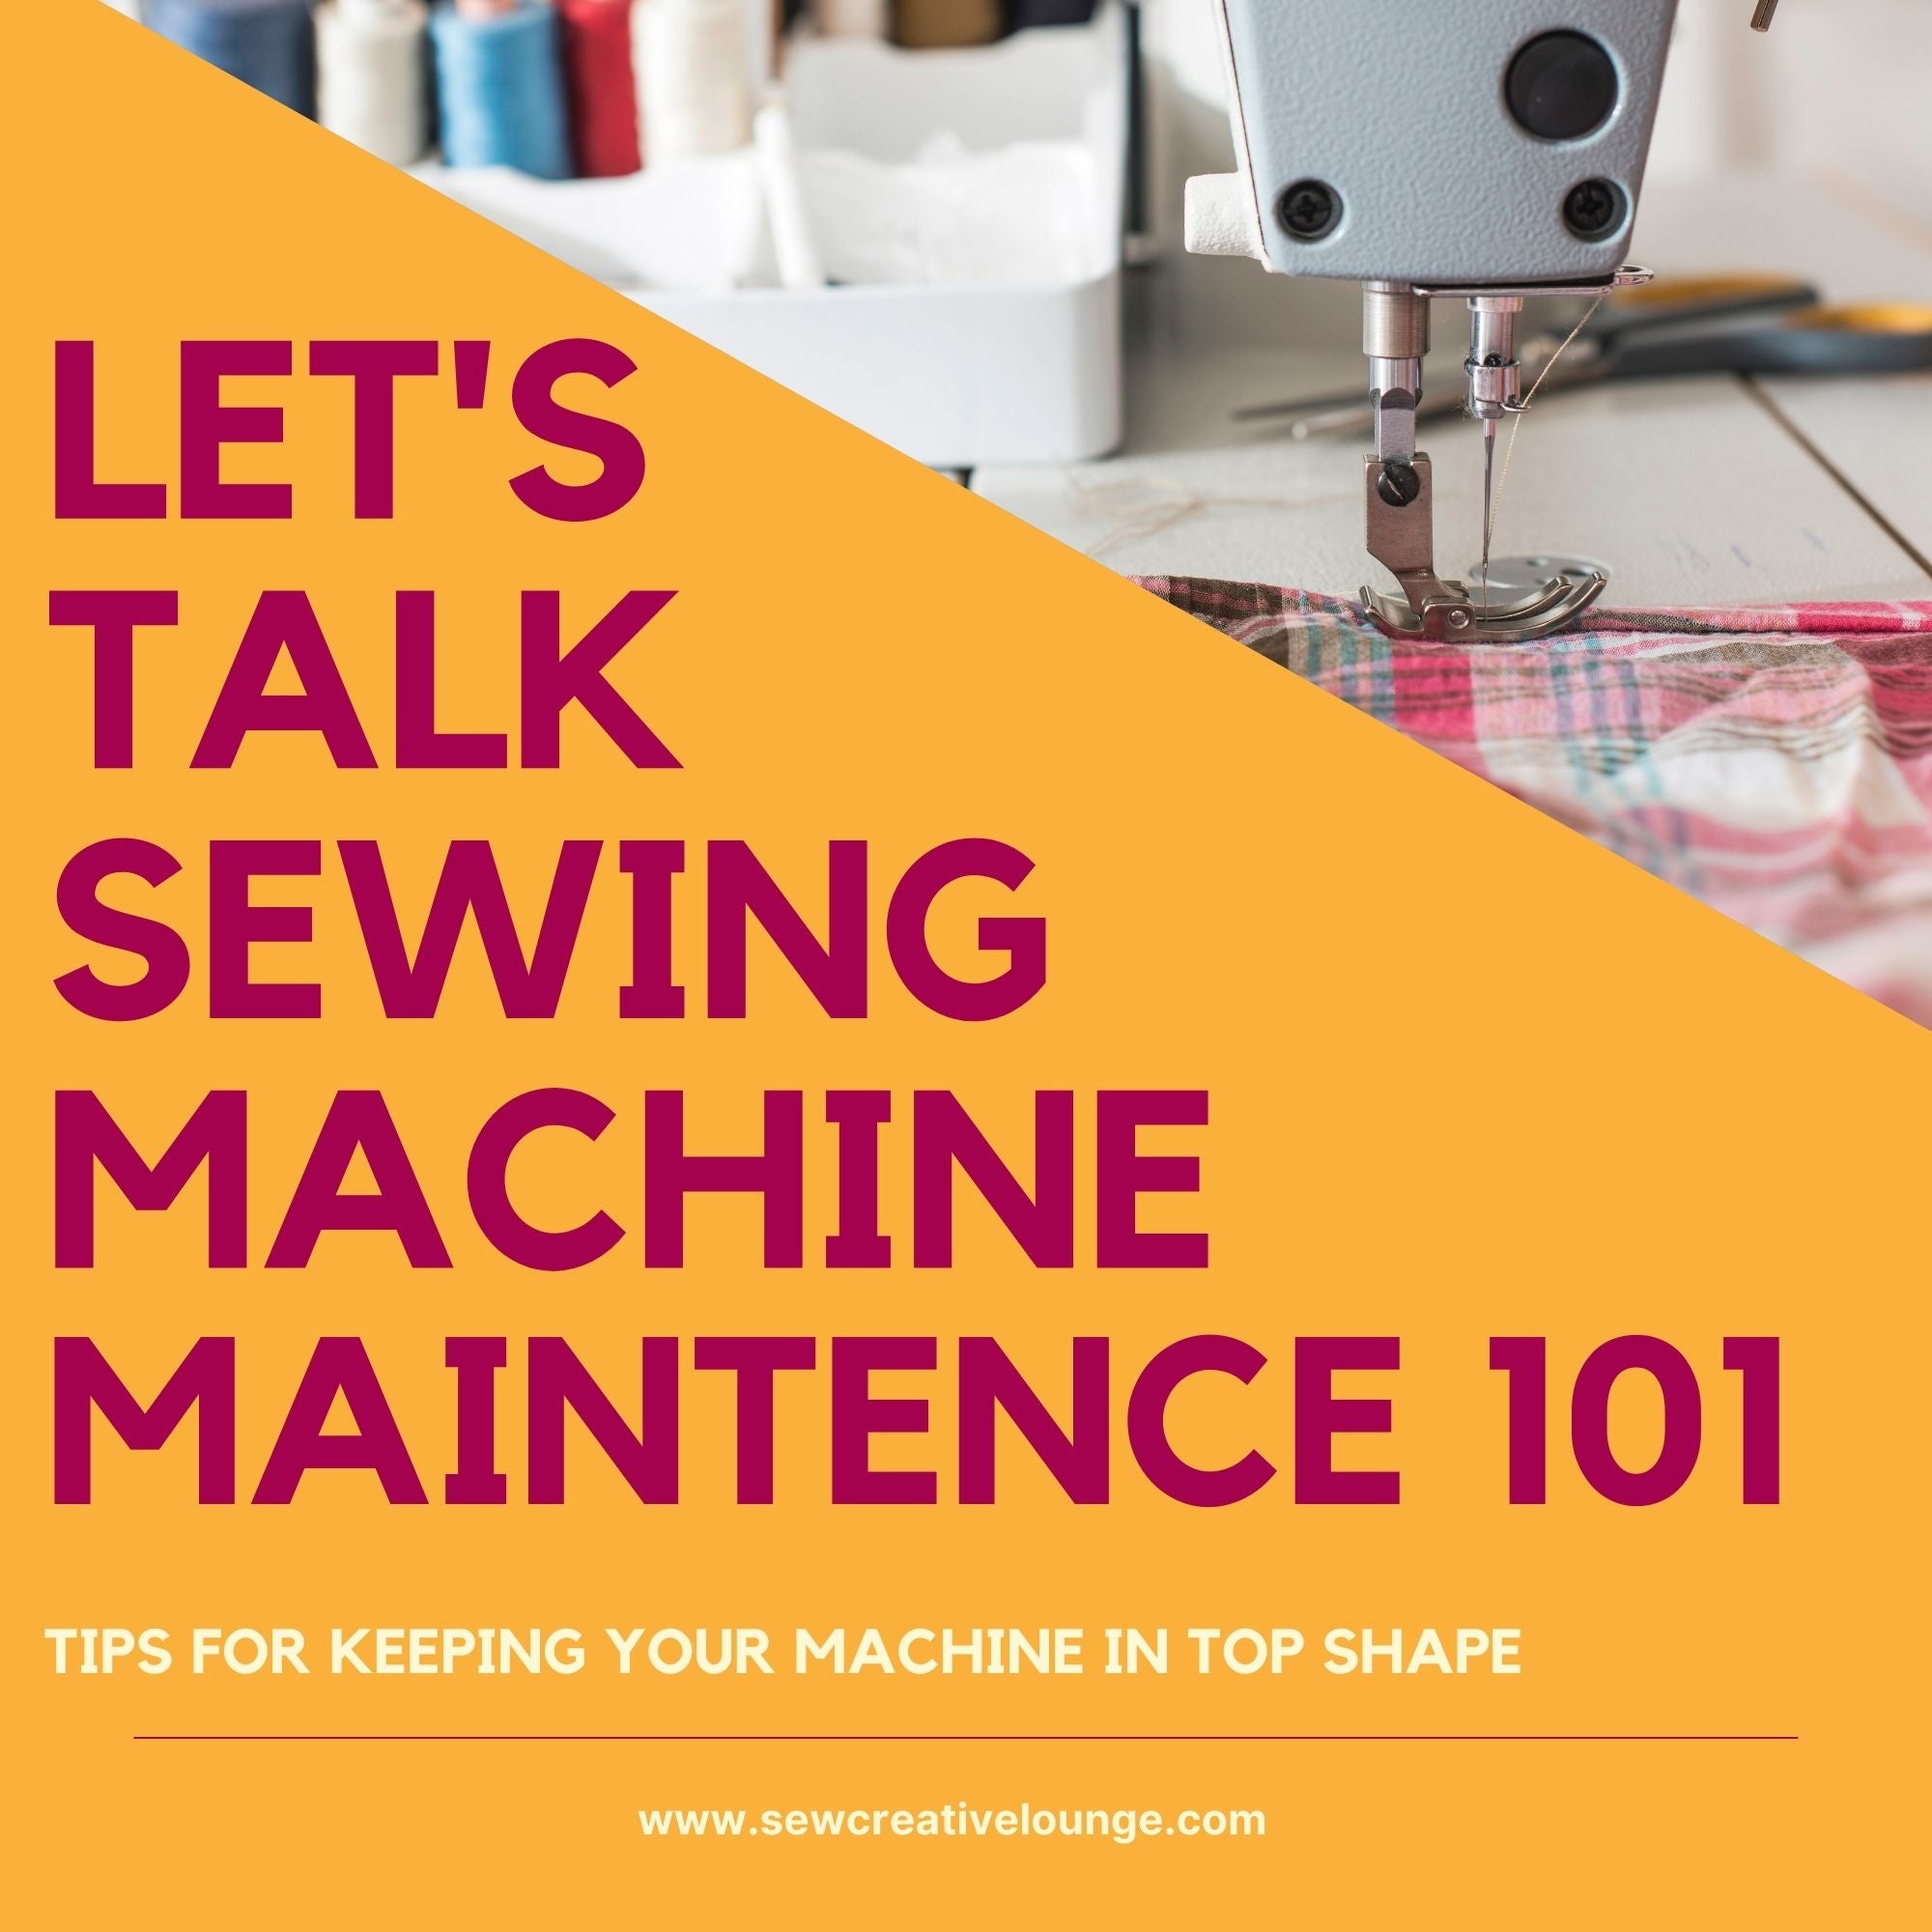 Sewing Machine Maintenance 101: Tips for Keeping Your Machine in Top Shape